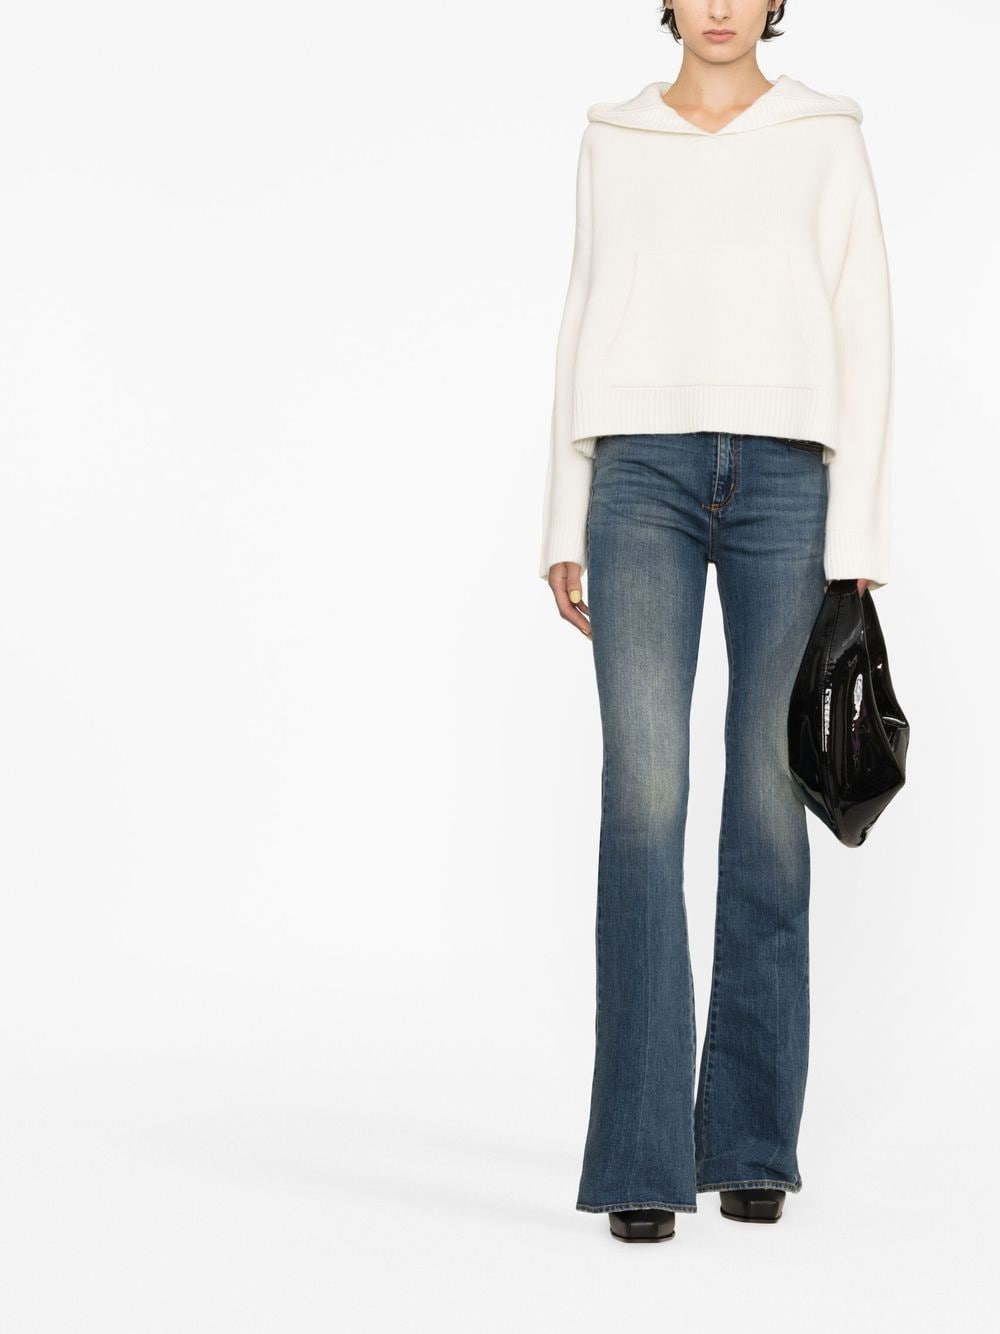 Image 2 of Alexander McQueen high-waisted flared jeans